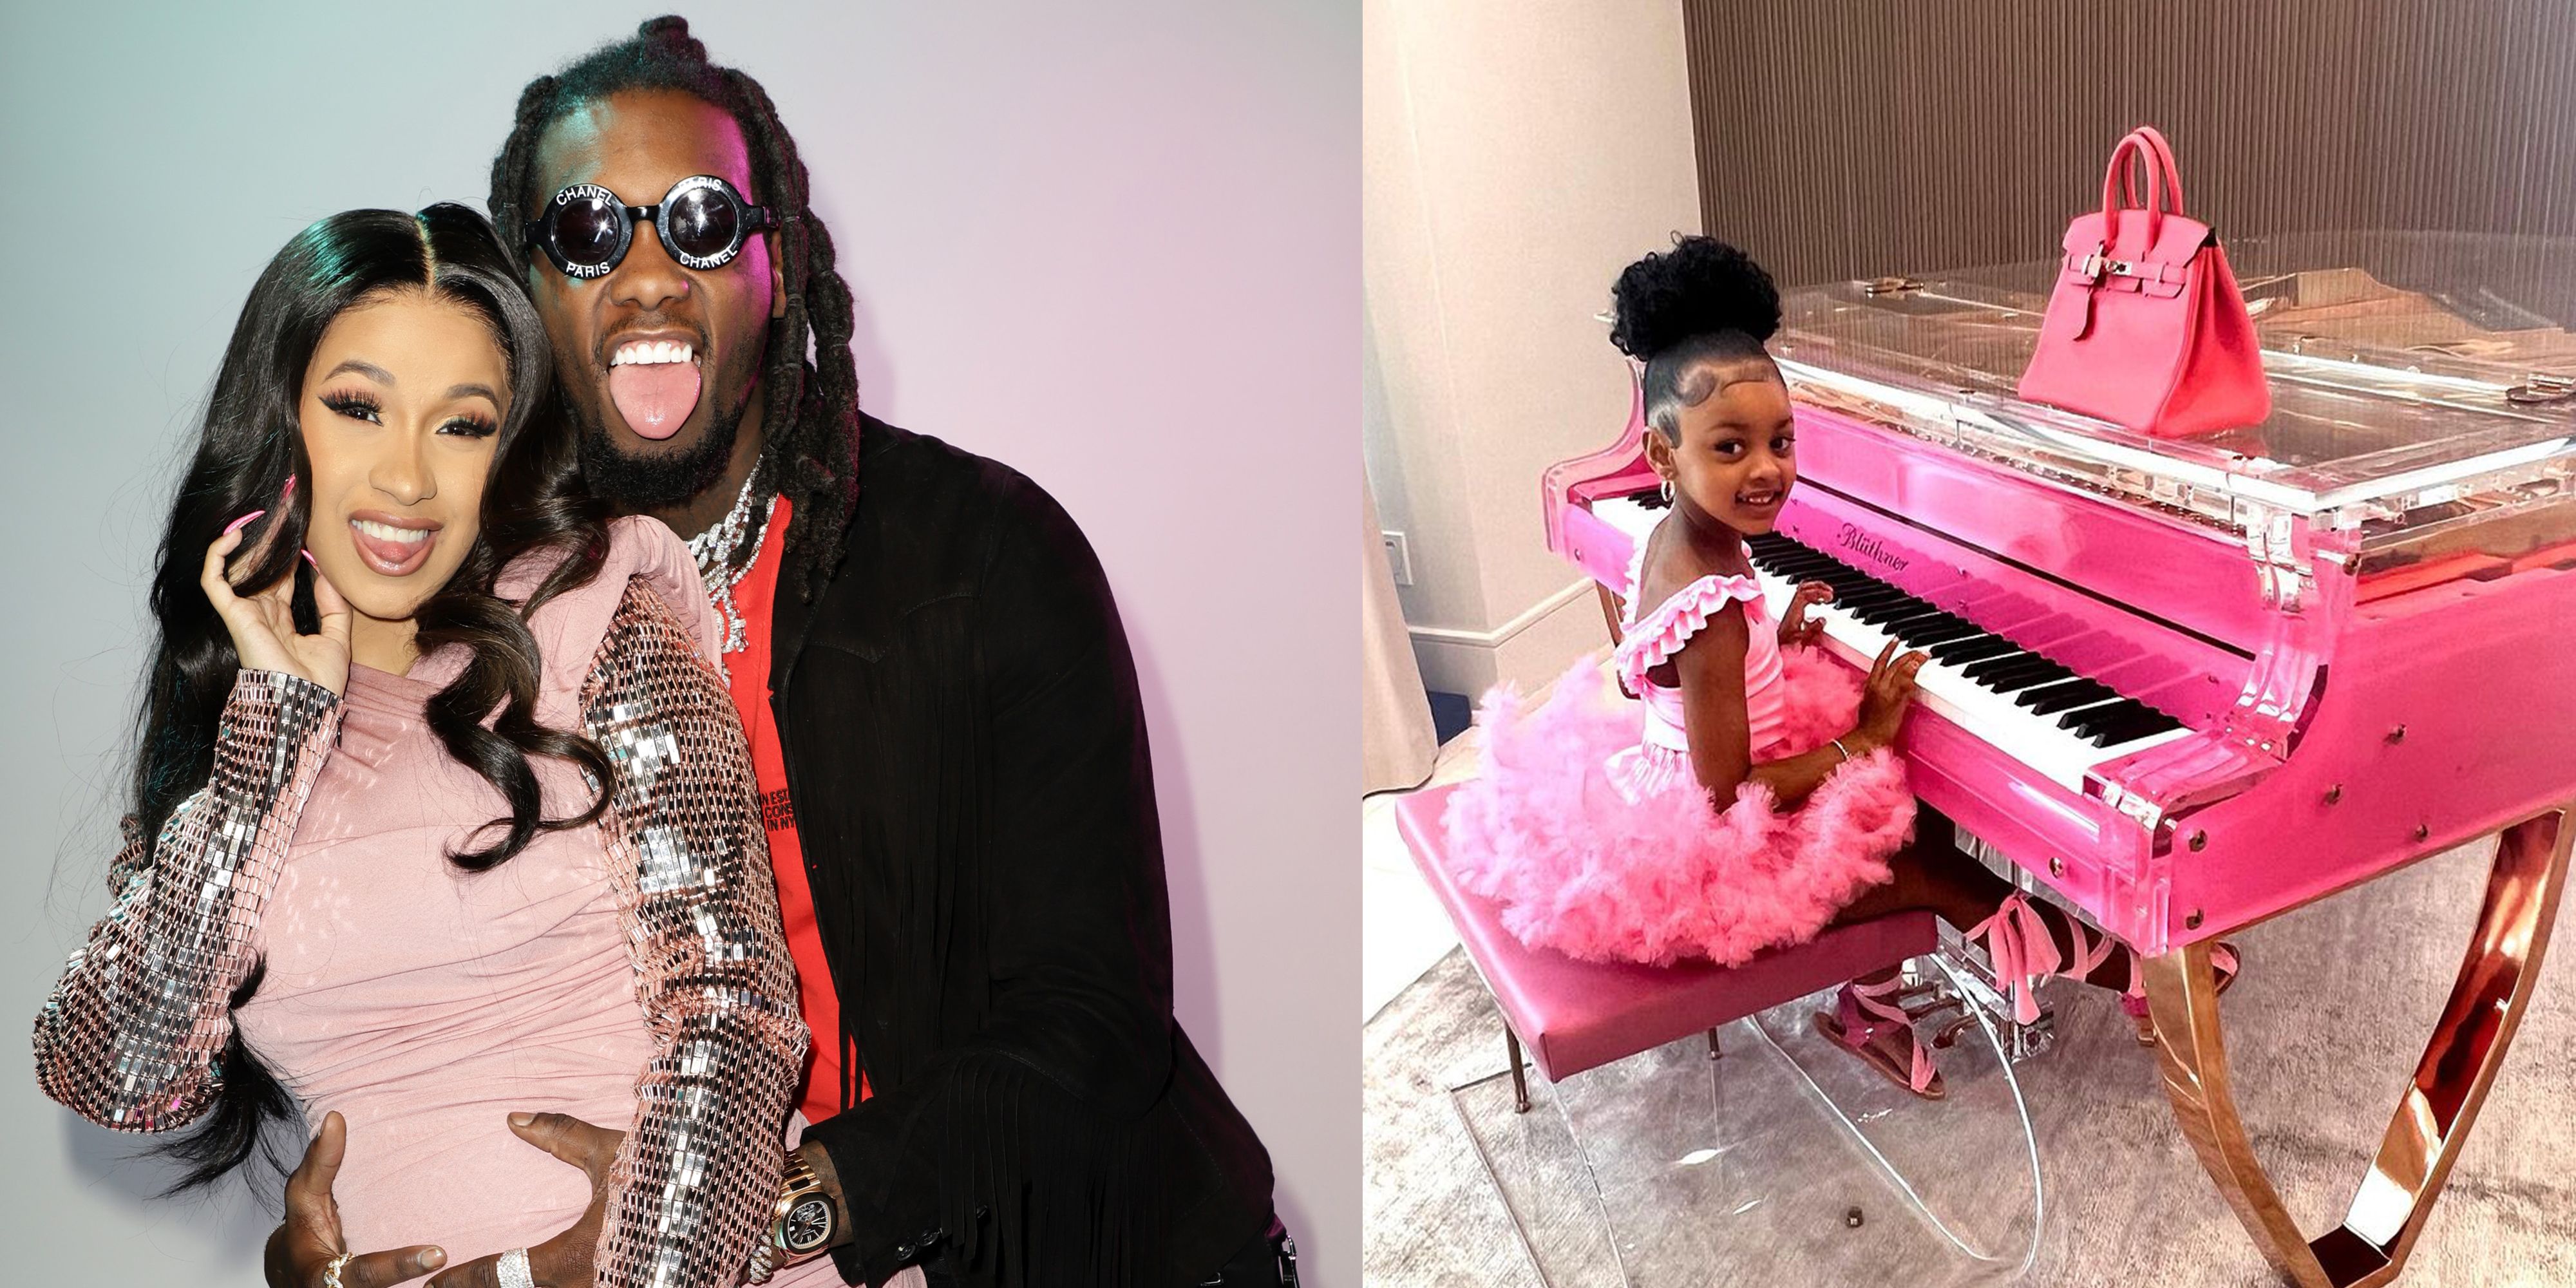 Stephanie Blogs and Updates - Offset Buys Daughter Kulture a